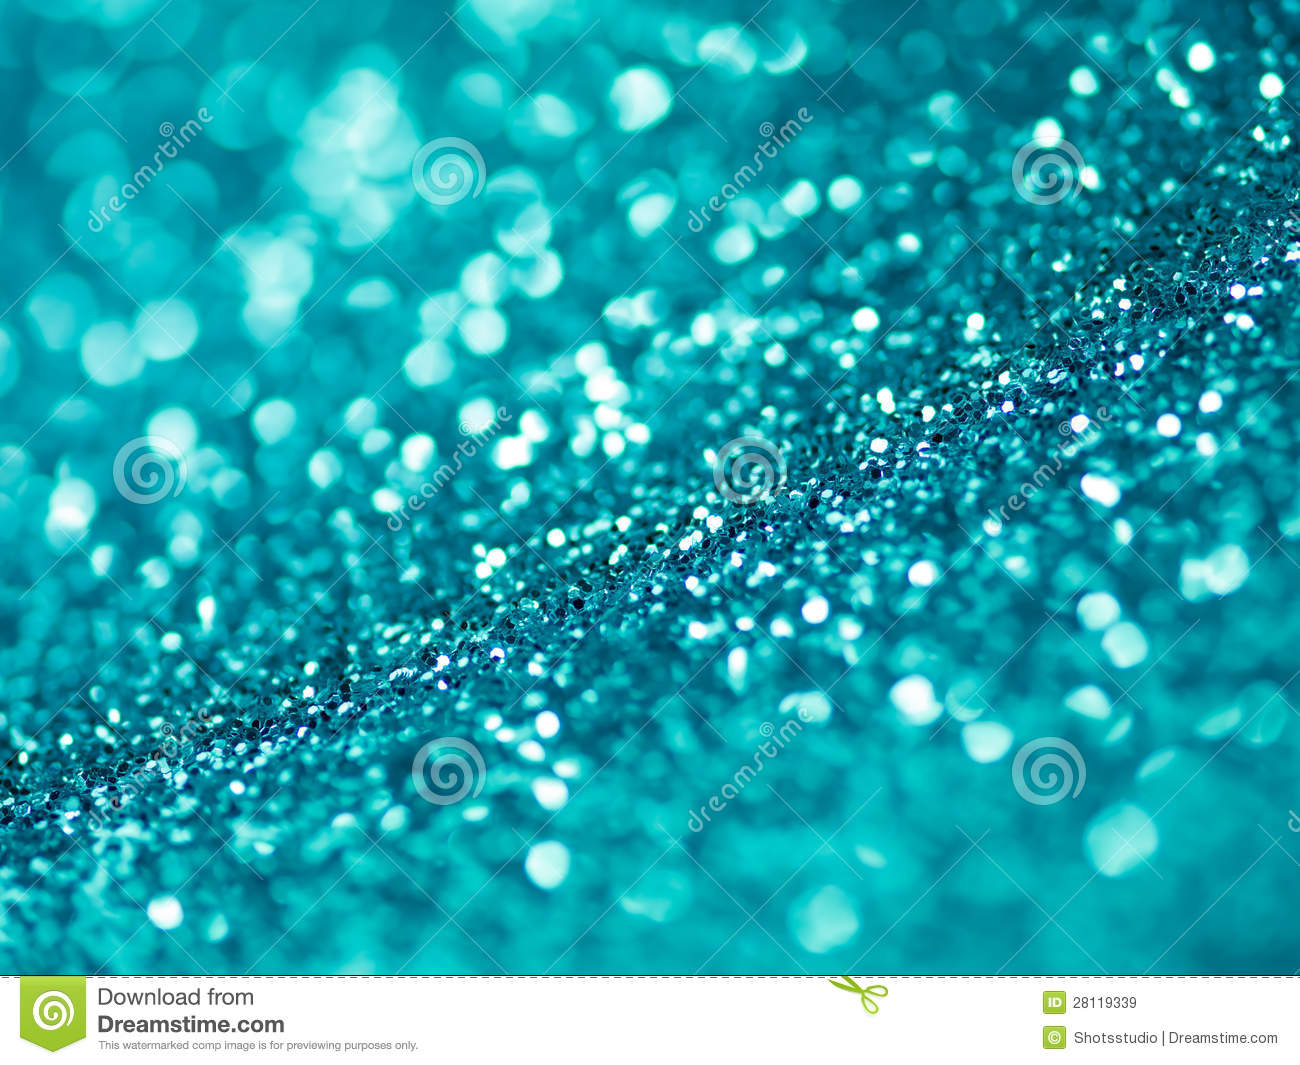 Blue Glitter Royalty Free Stock Images   Image  28119339